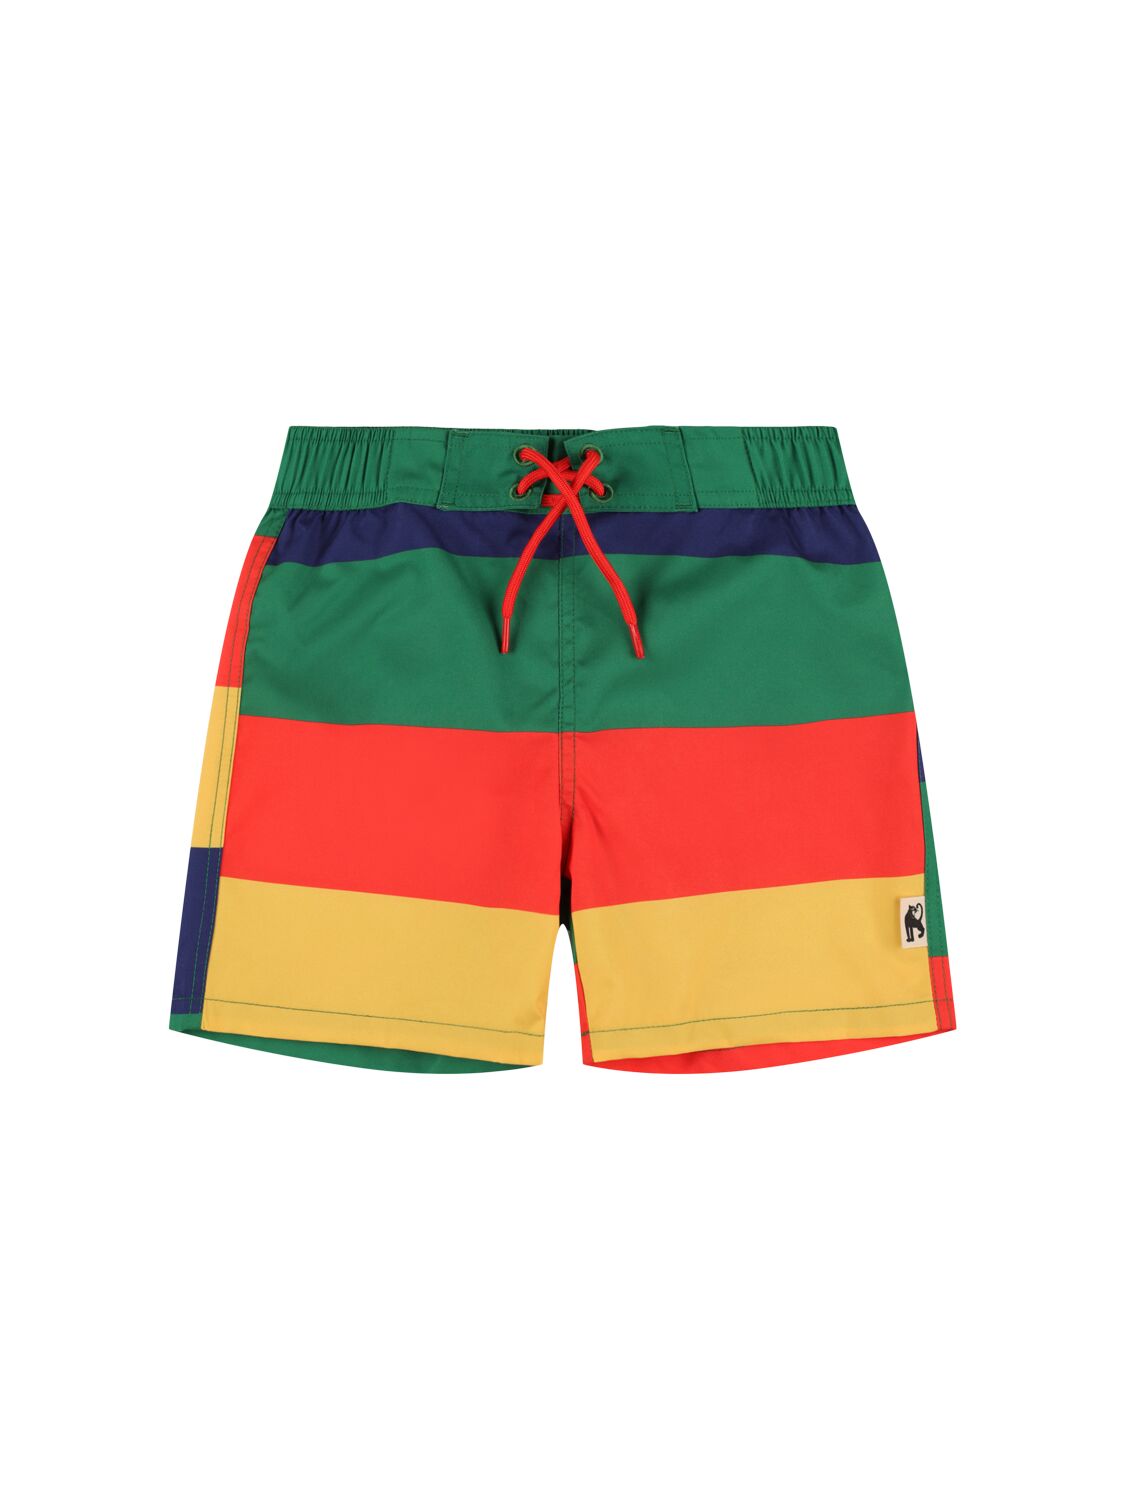 Image of Striped Recycled Tech Swim Shorts